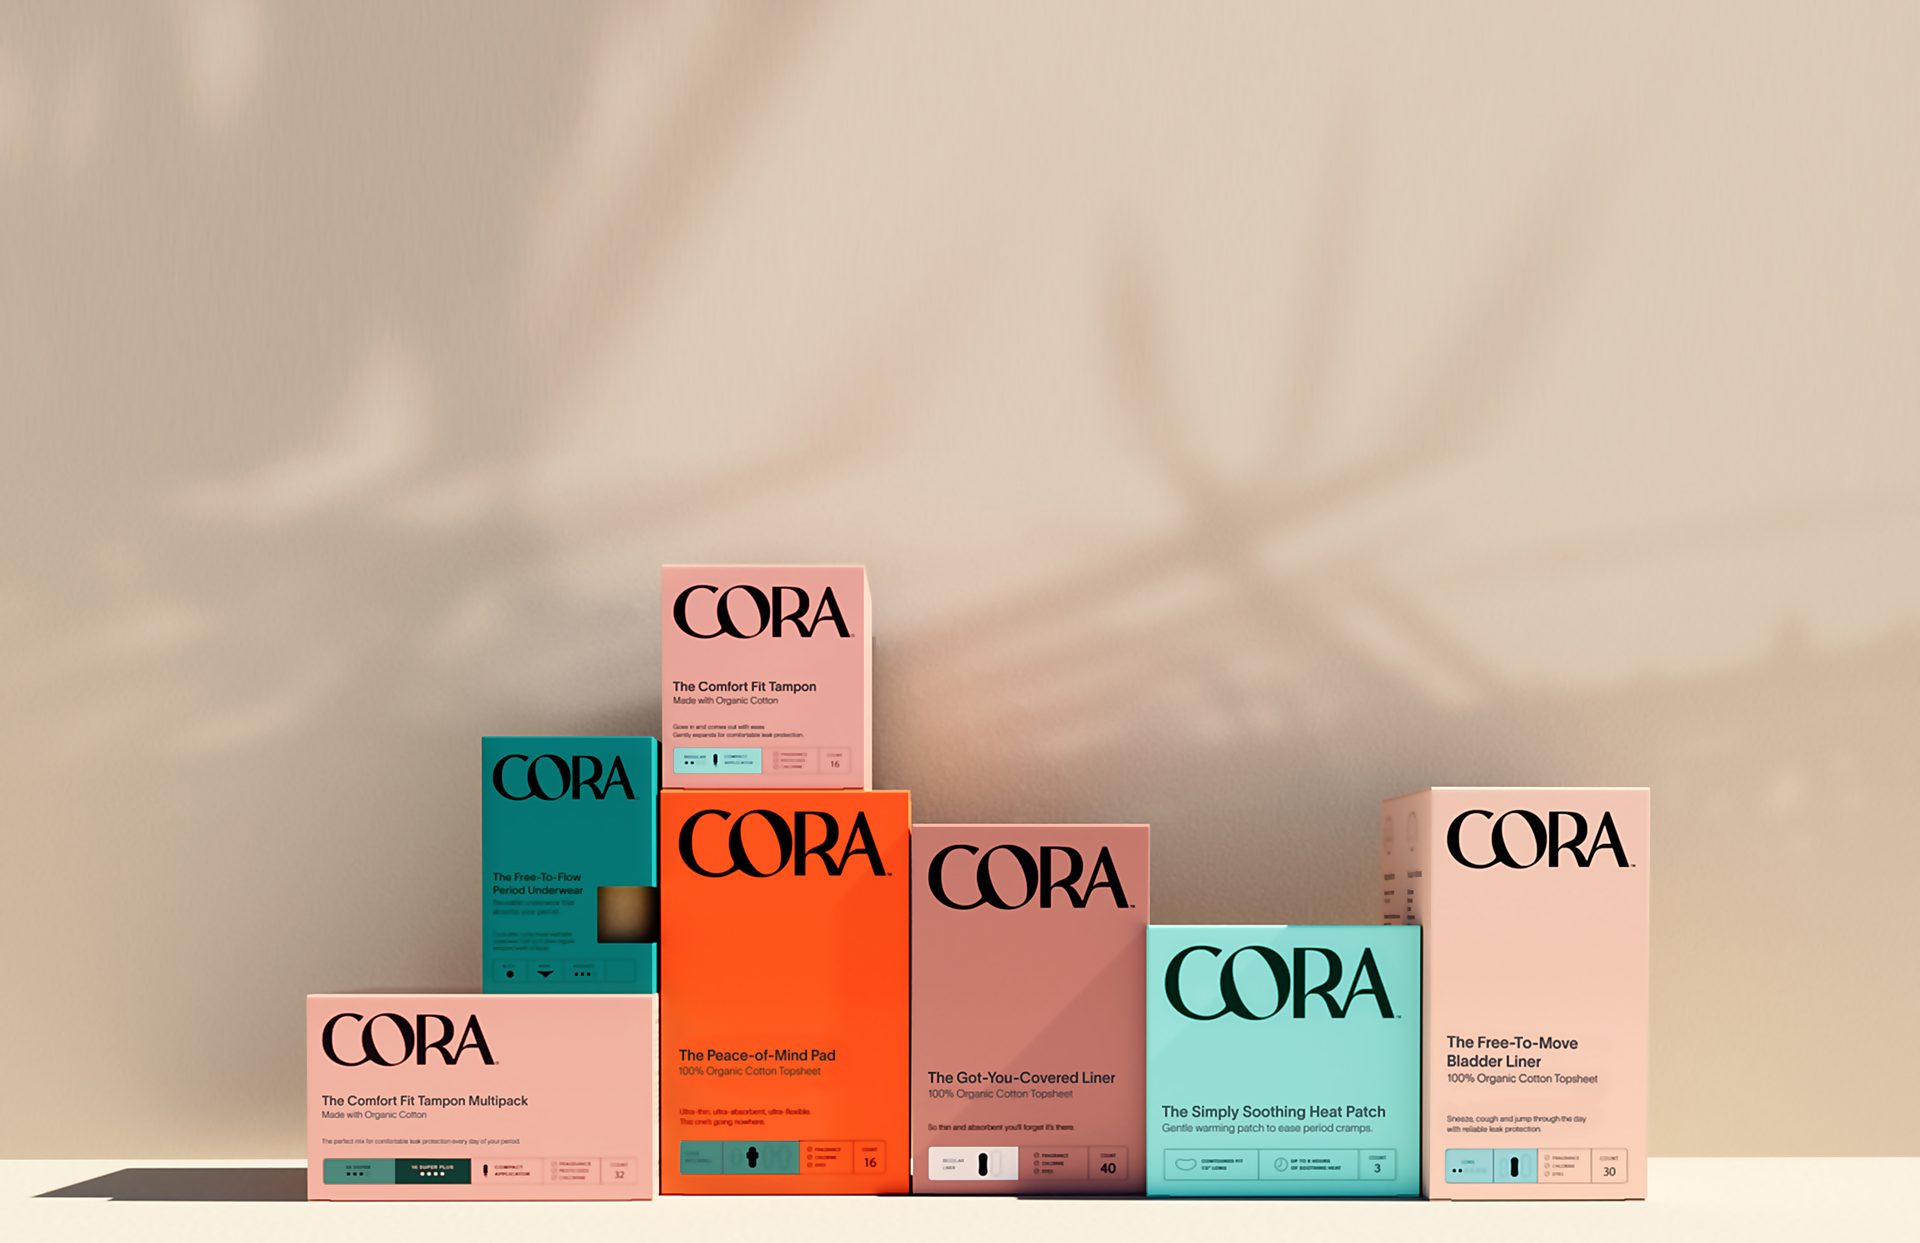 Cora product family shot